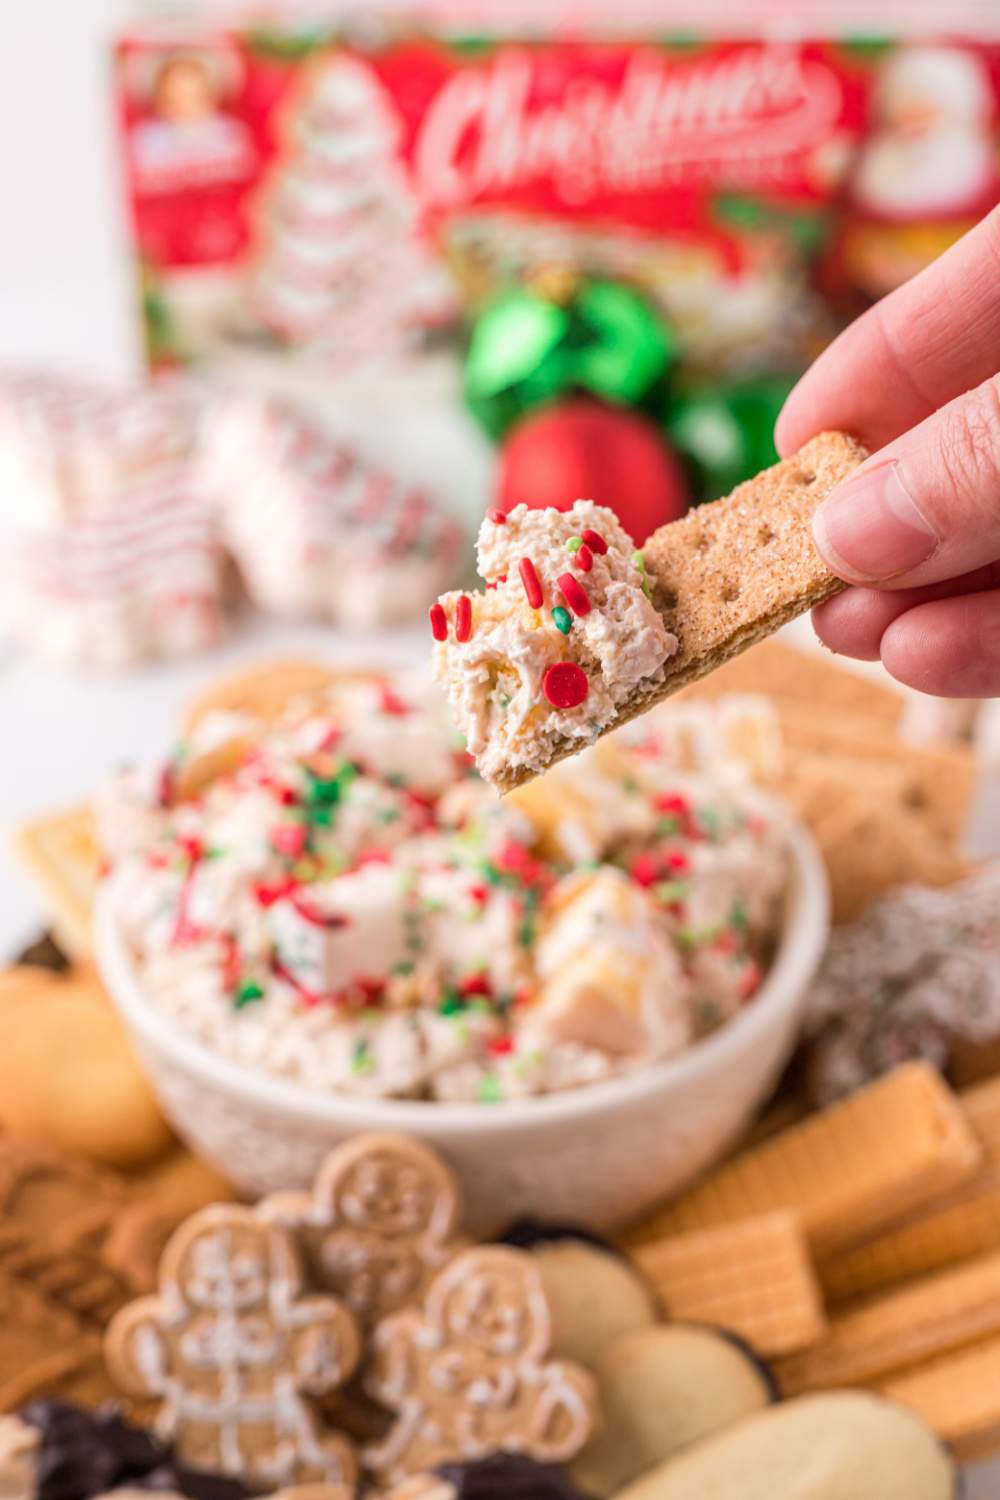 Scooping out some Little Debbie's Christmas Tree Cake Dip with a cookie